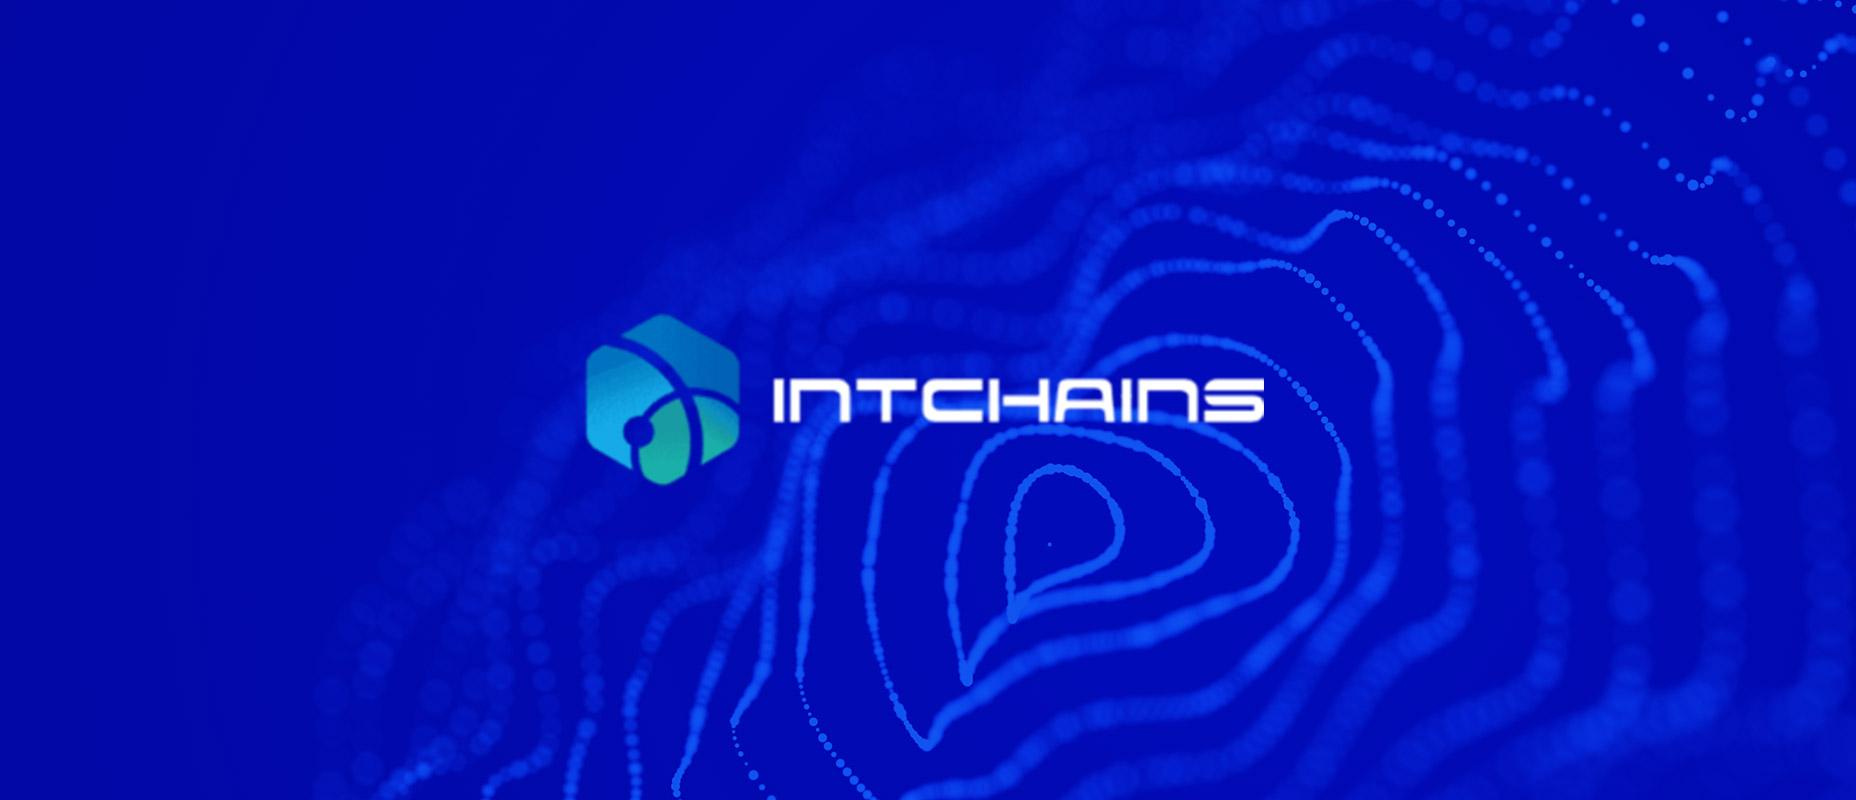 Intchains Group IPO: ASIC Producer for Mining